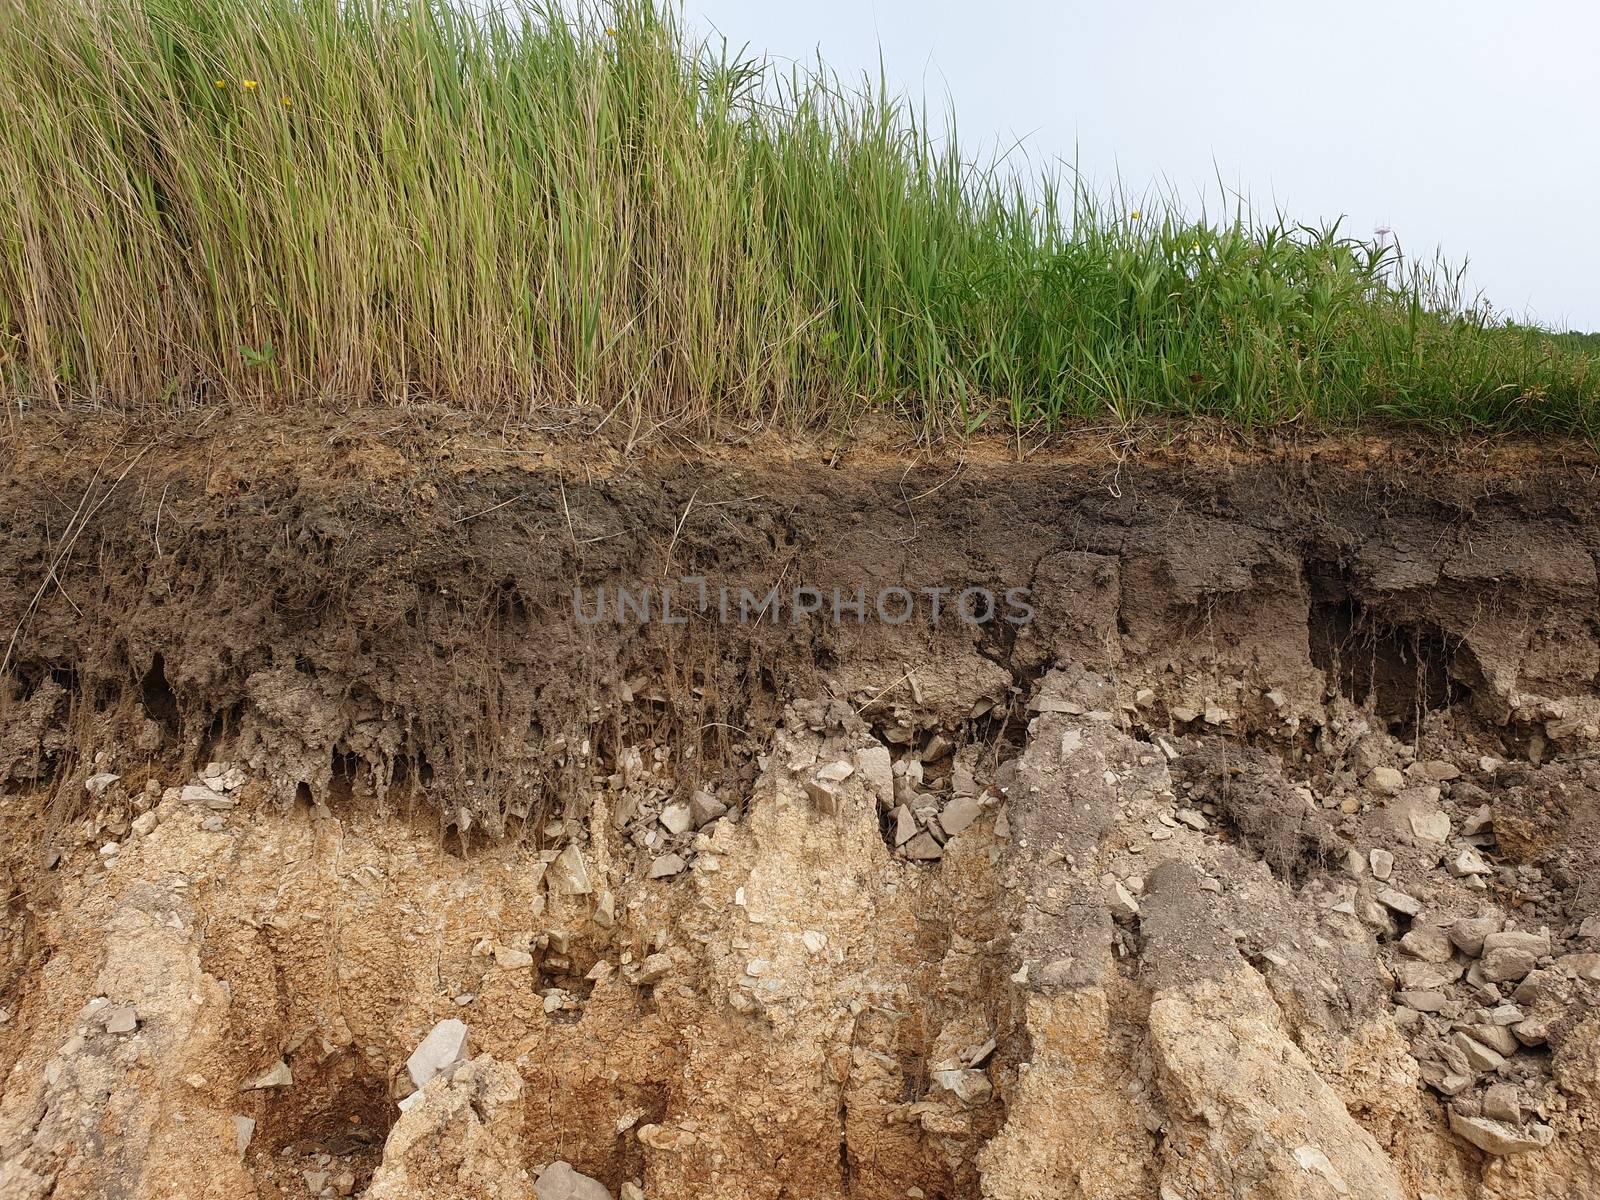 Cut soil with grass. Cross section of grass and soil